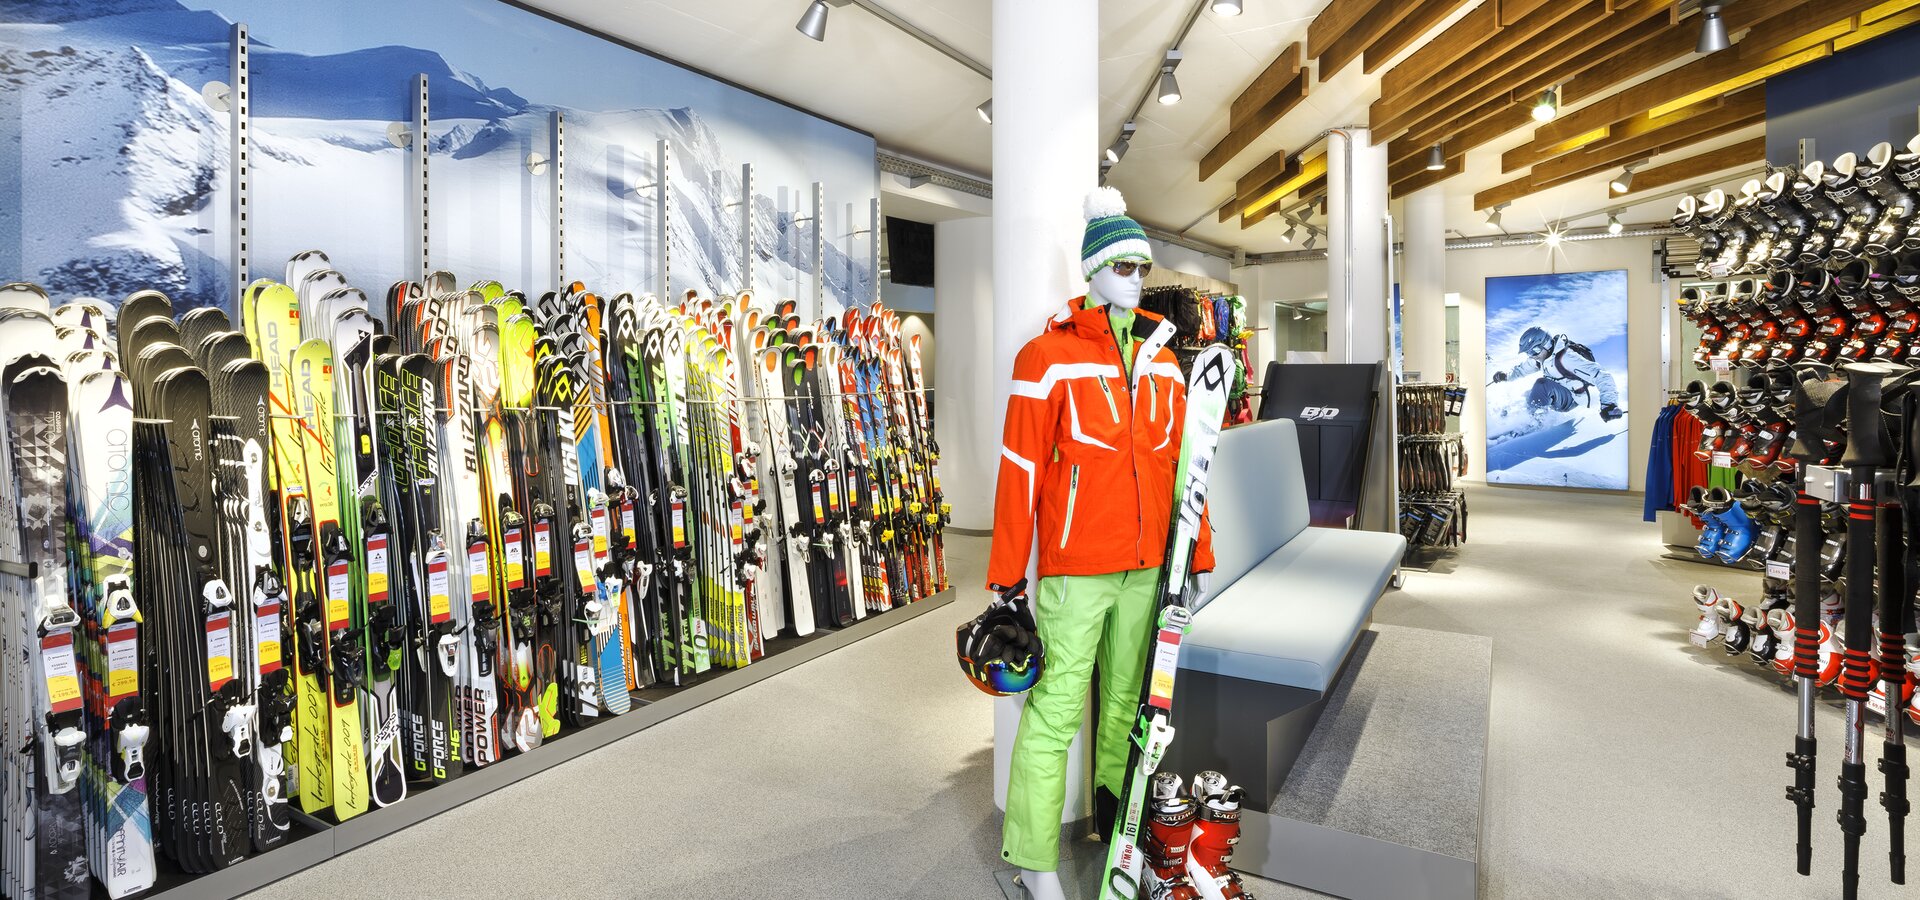  In Kaprun, you will find a wide selection of sports shops and ski-rental businesses with expert staff | © Kitzsteinhorn